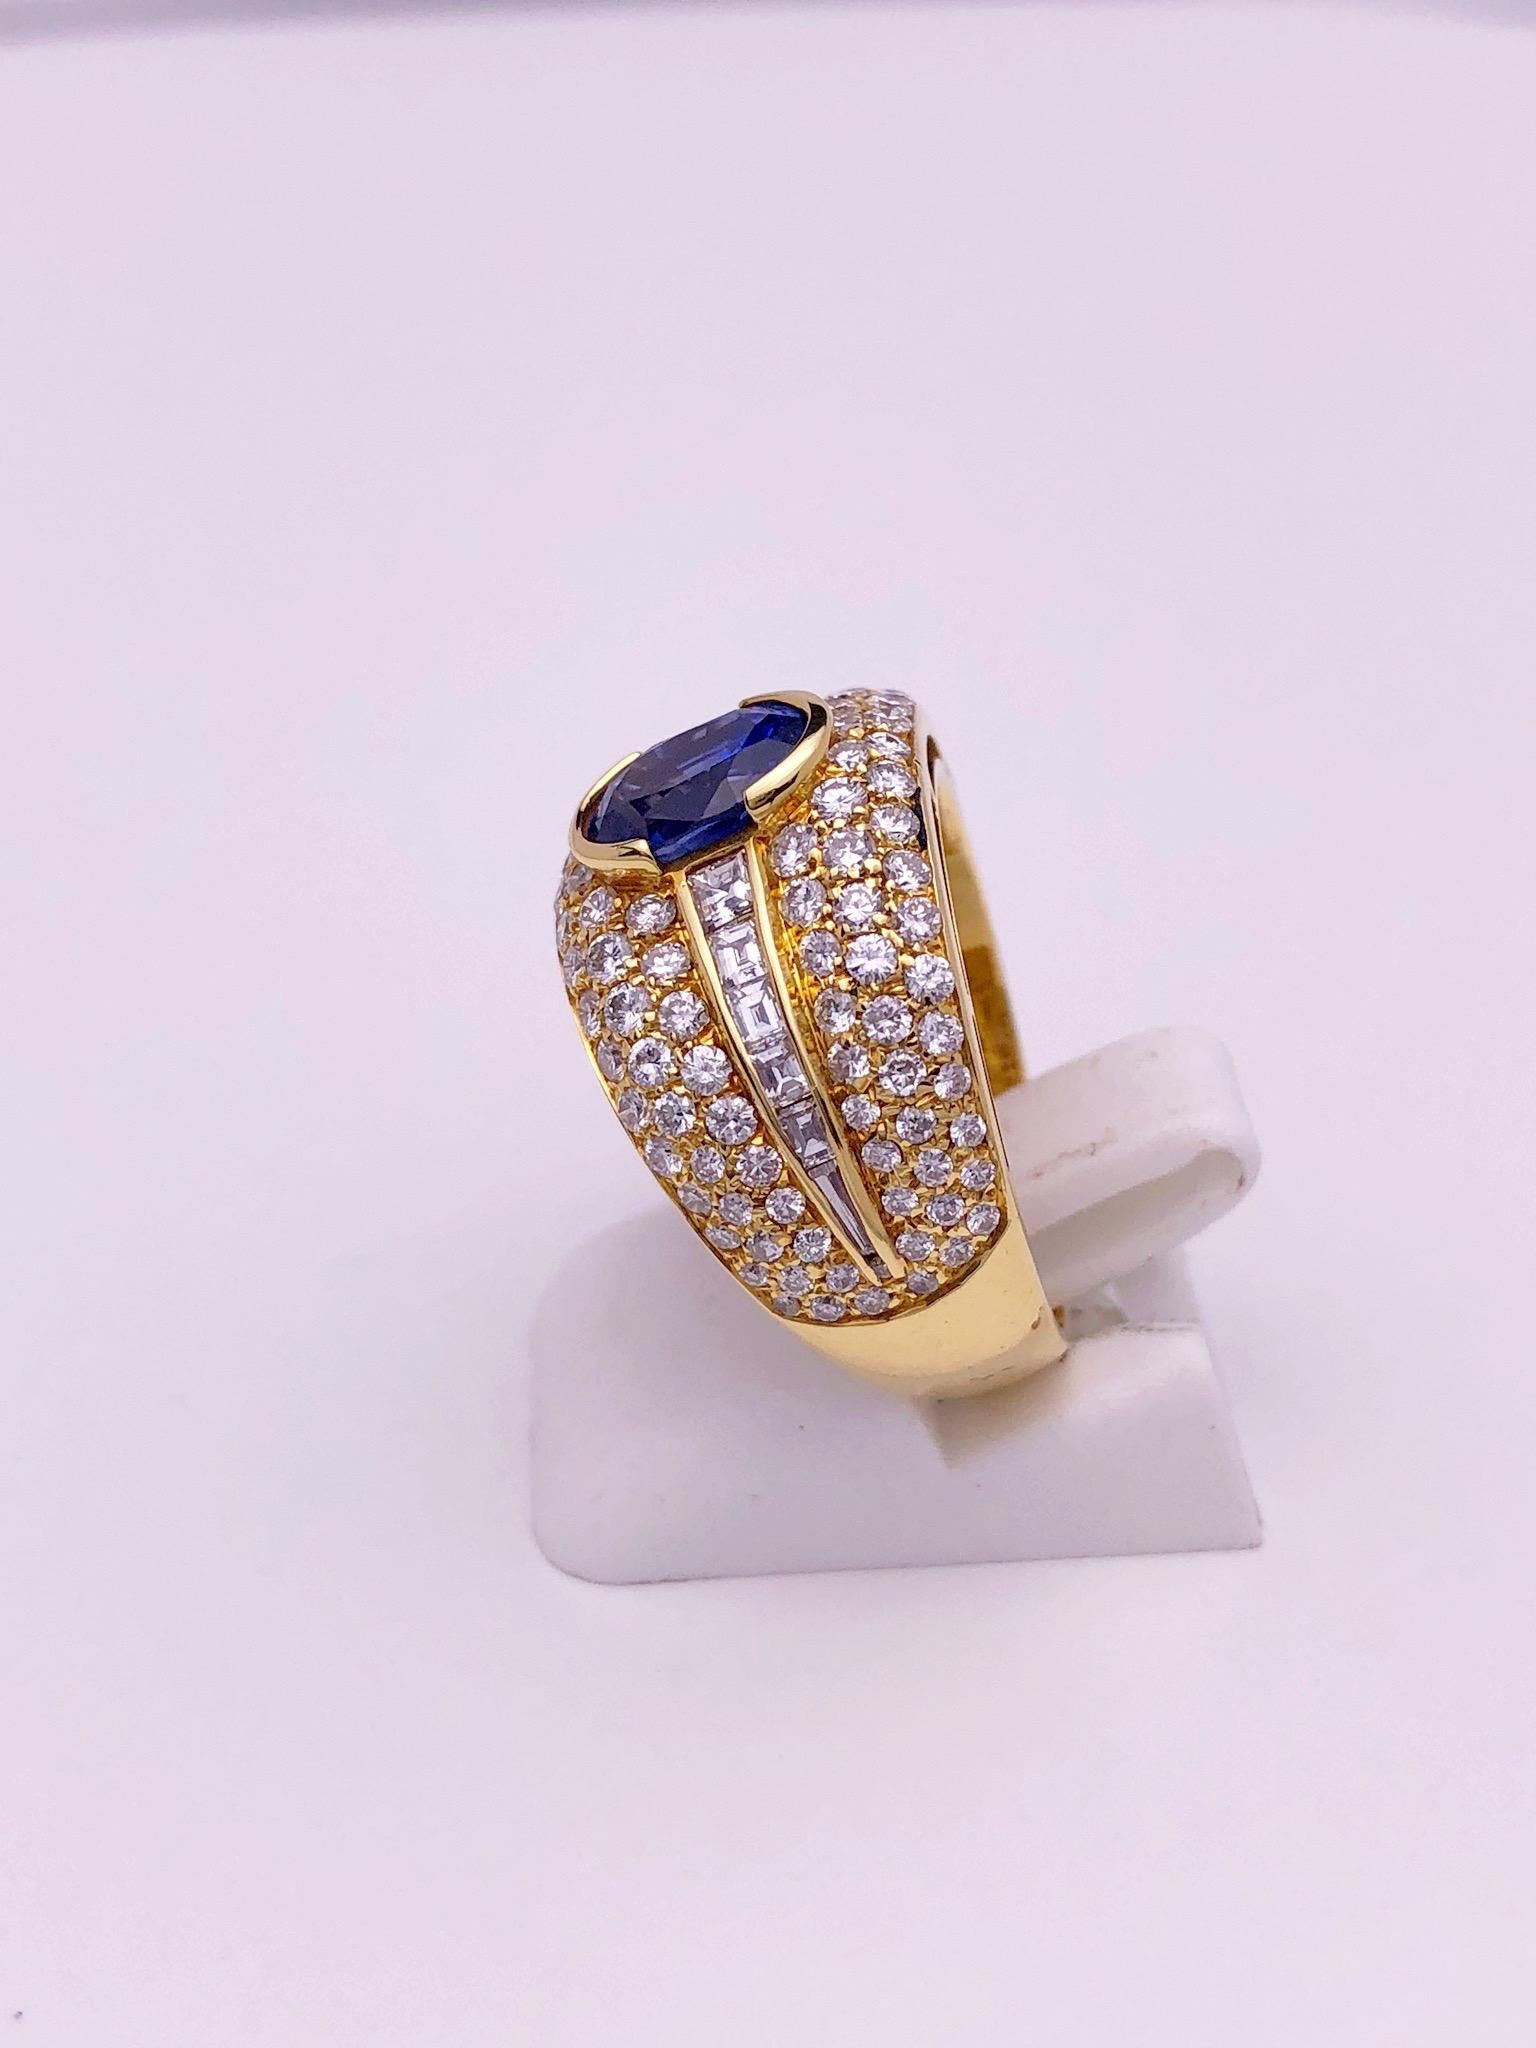 18 Karat Yellow Gold Diamond Ring with 1.47 Carat Oval Blue Sapphire Center In New Condition For Sale In New York, NY